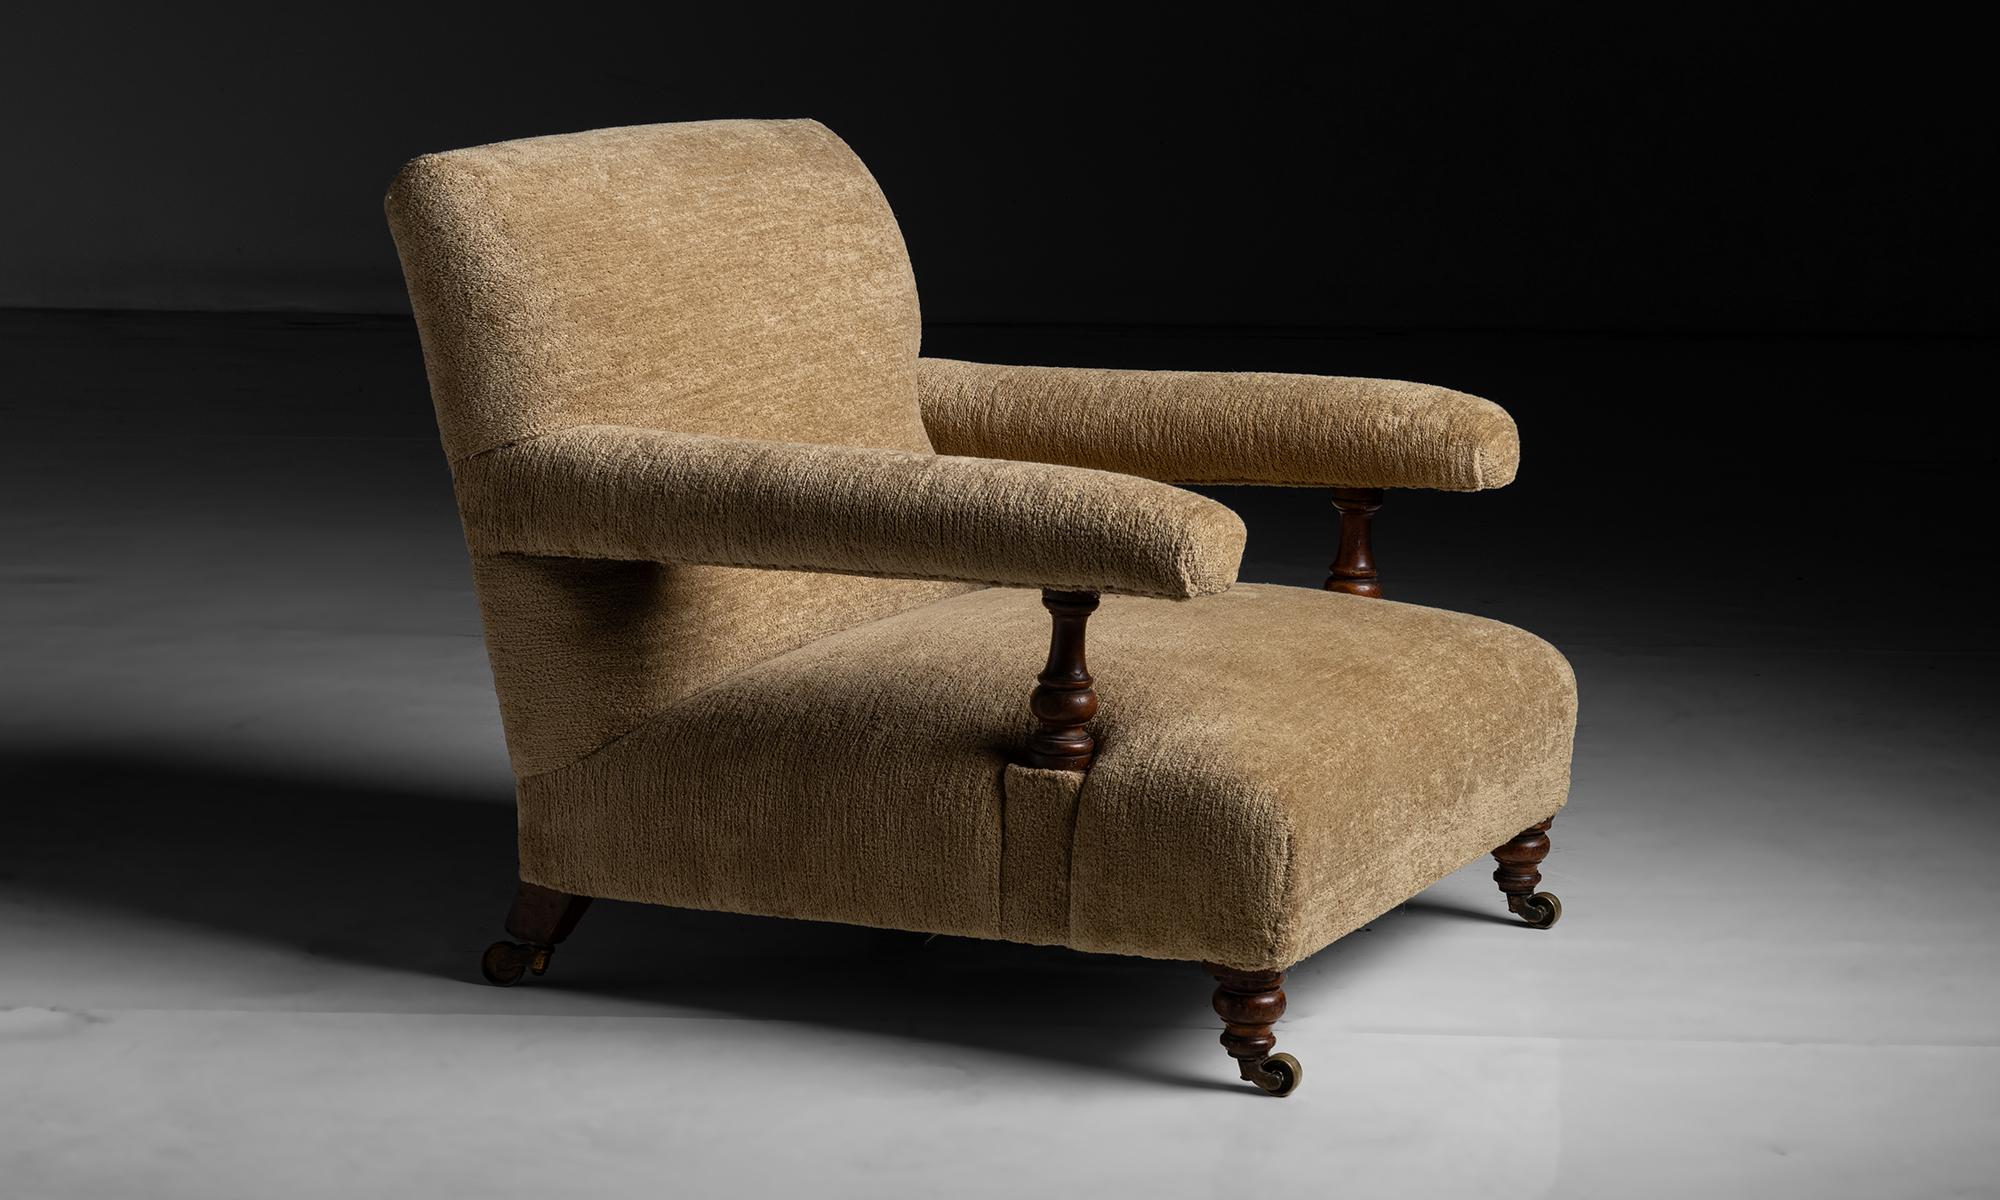 Turned Howard & Sons Open Armchair in Chenille by Pierre Frey, England circa 1850